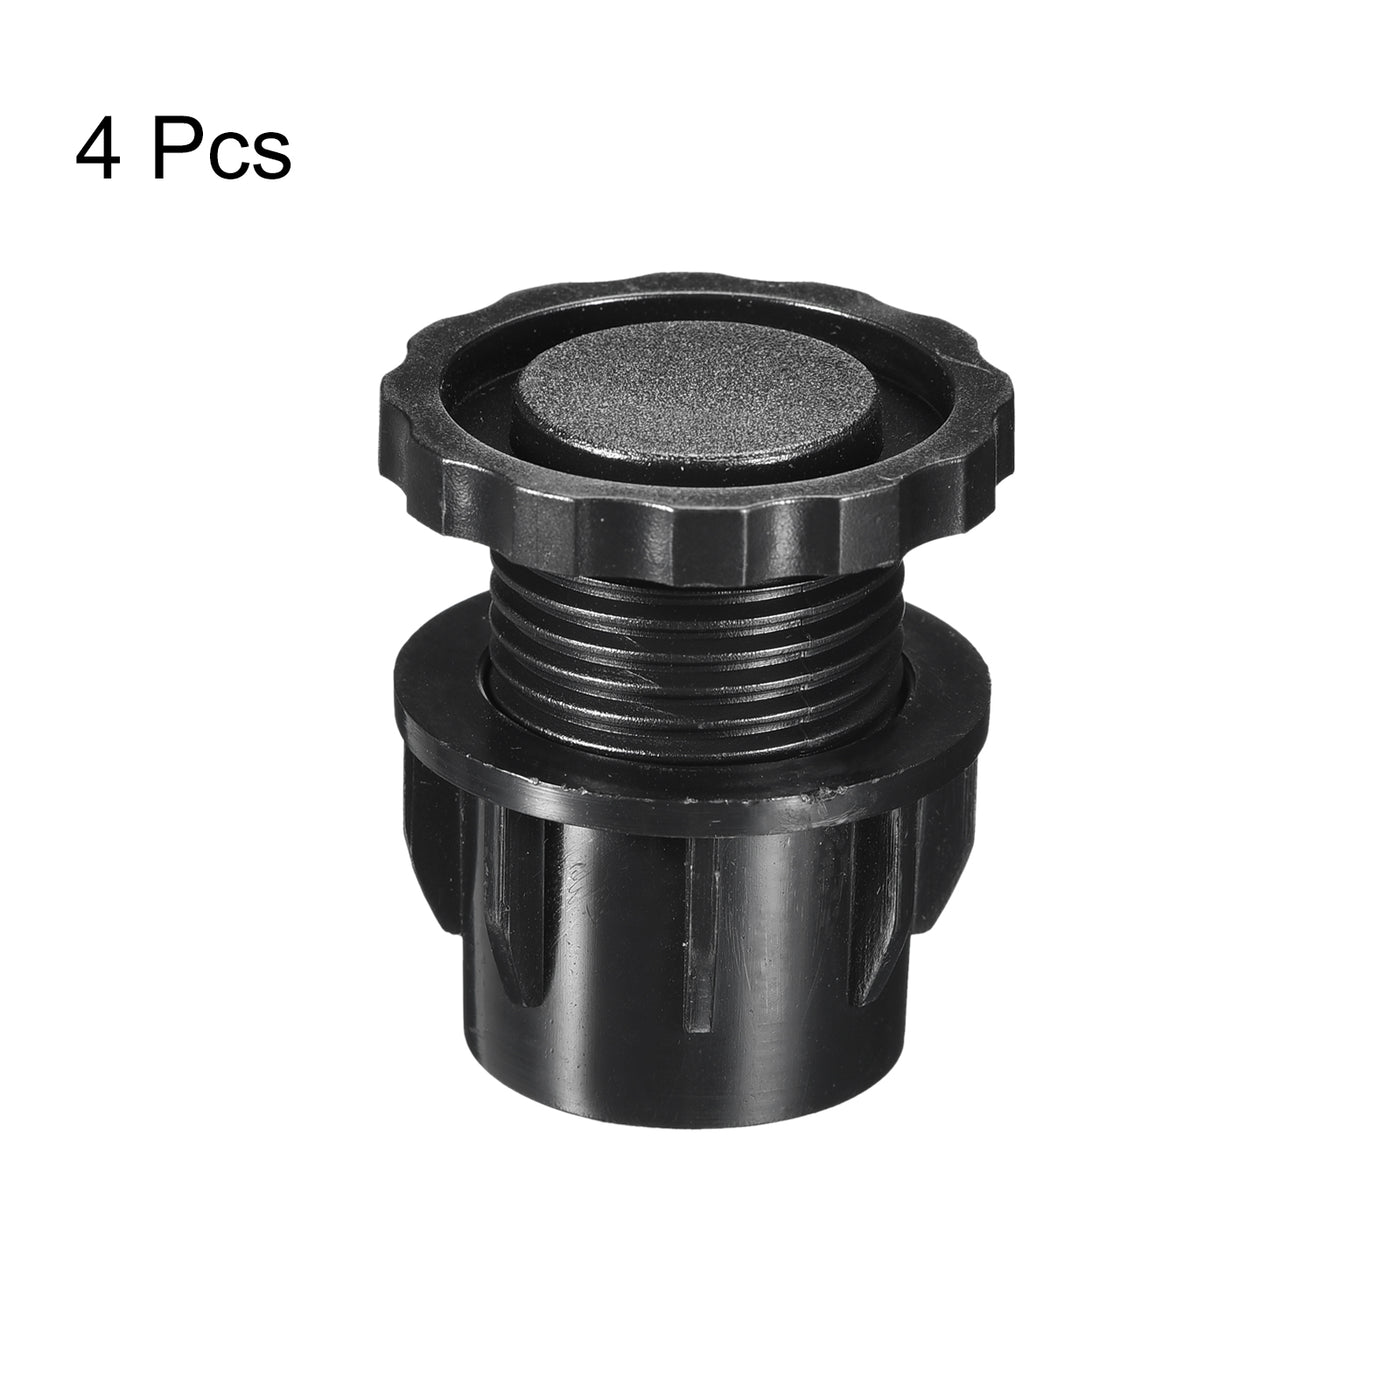 uxcell Uxcell 4Pcs Inserts for Round Tubes with Leveling Feet, for 42mm/1.65" Dia Round Tube